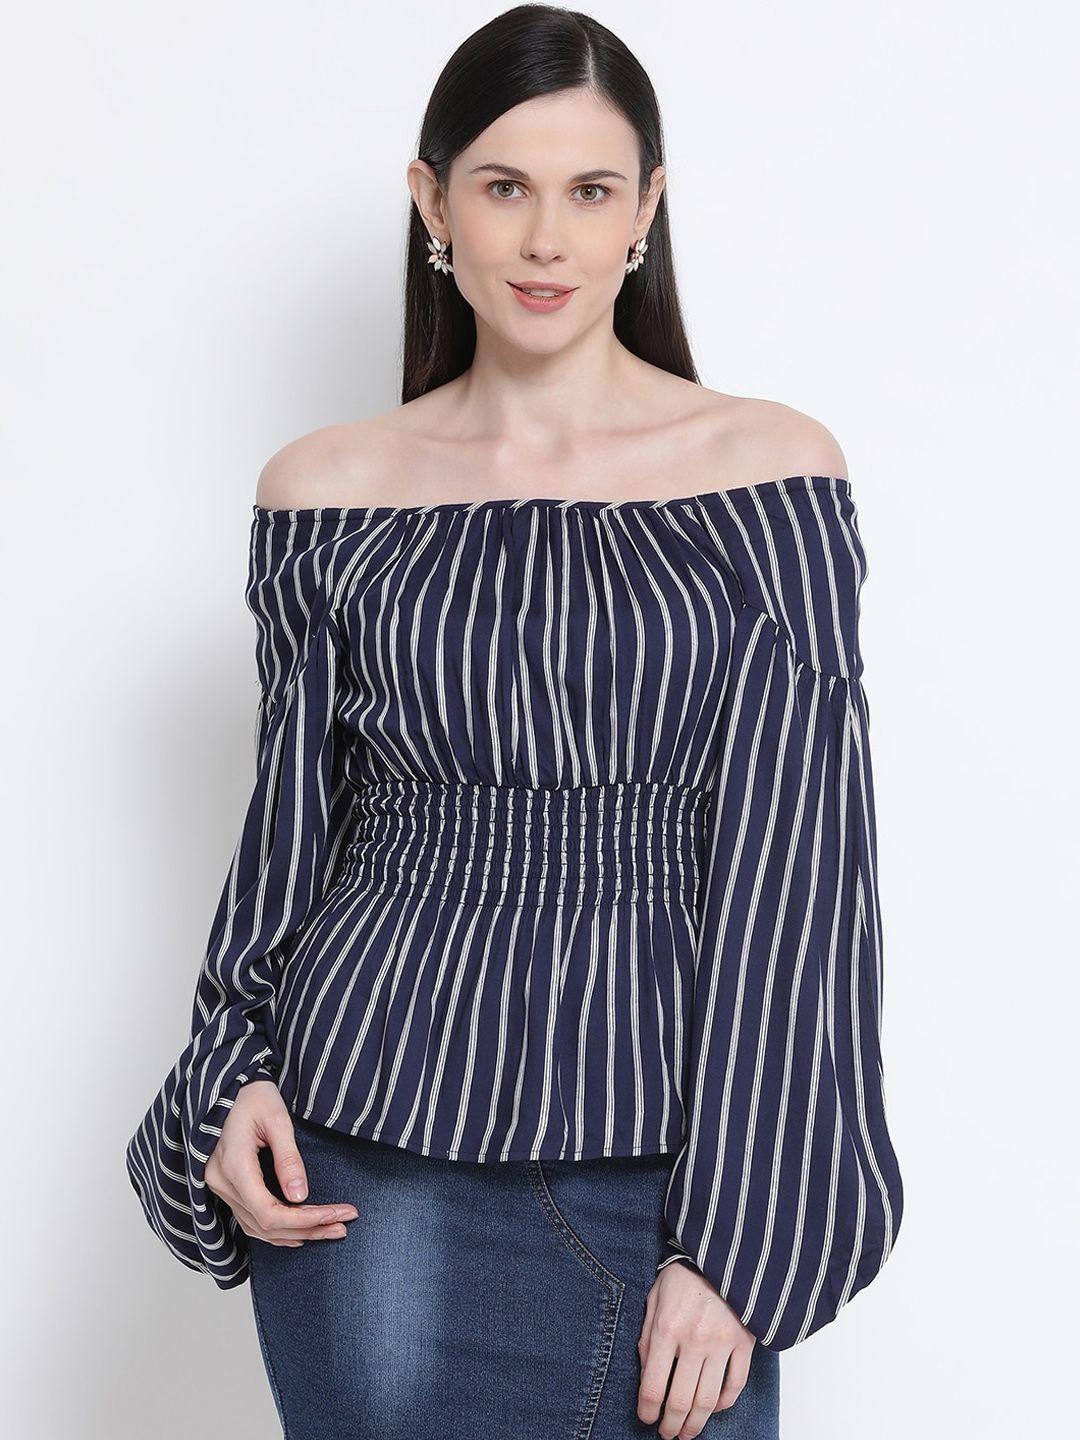 oxolloxo-women-navy-blue-striped-cinched-waist-top